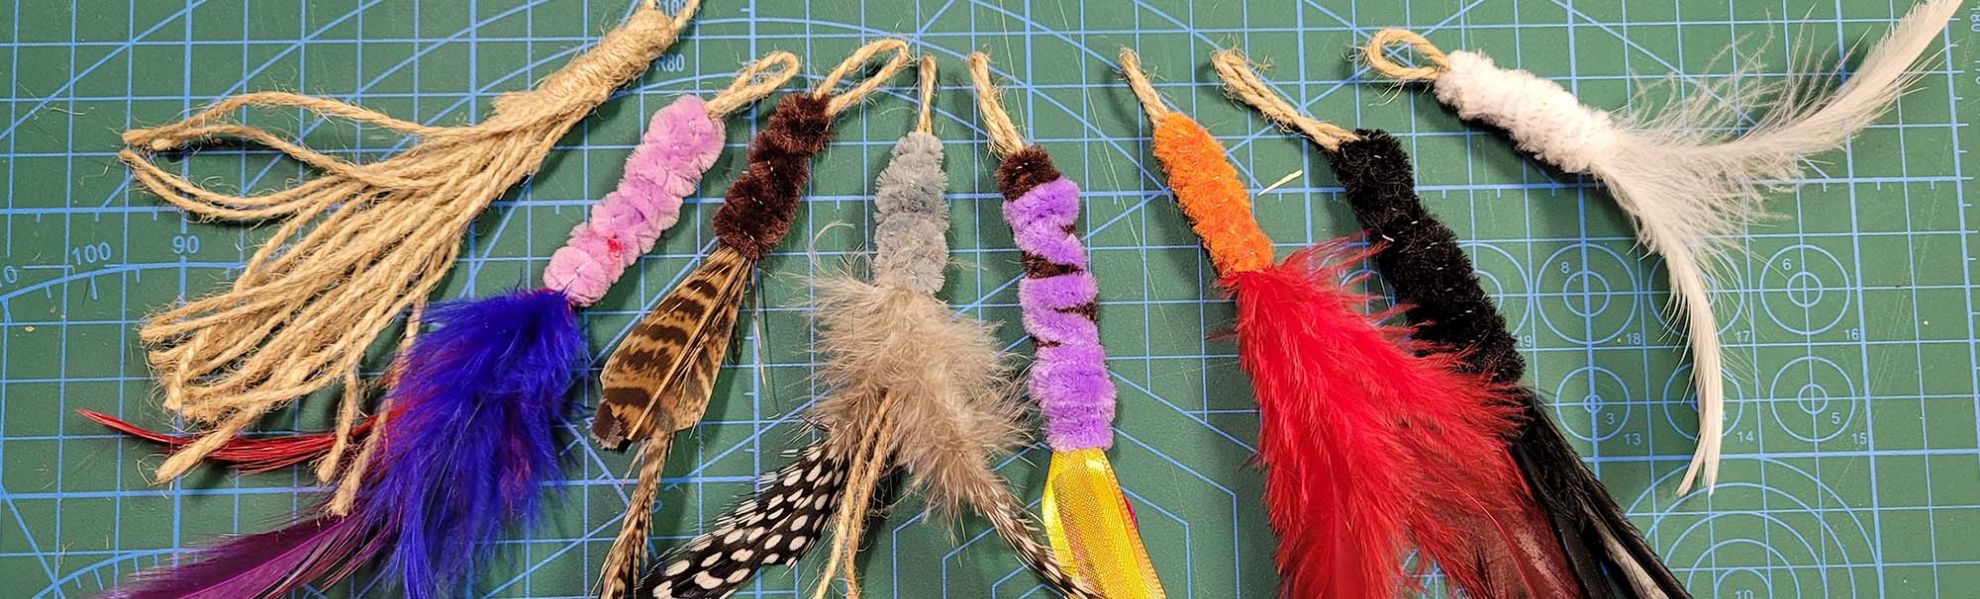 Set of handmade from feathers hemp ribbons refill toys for frenzy & da bird type wand teasers